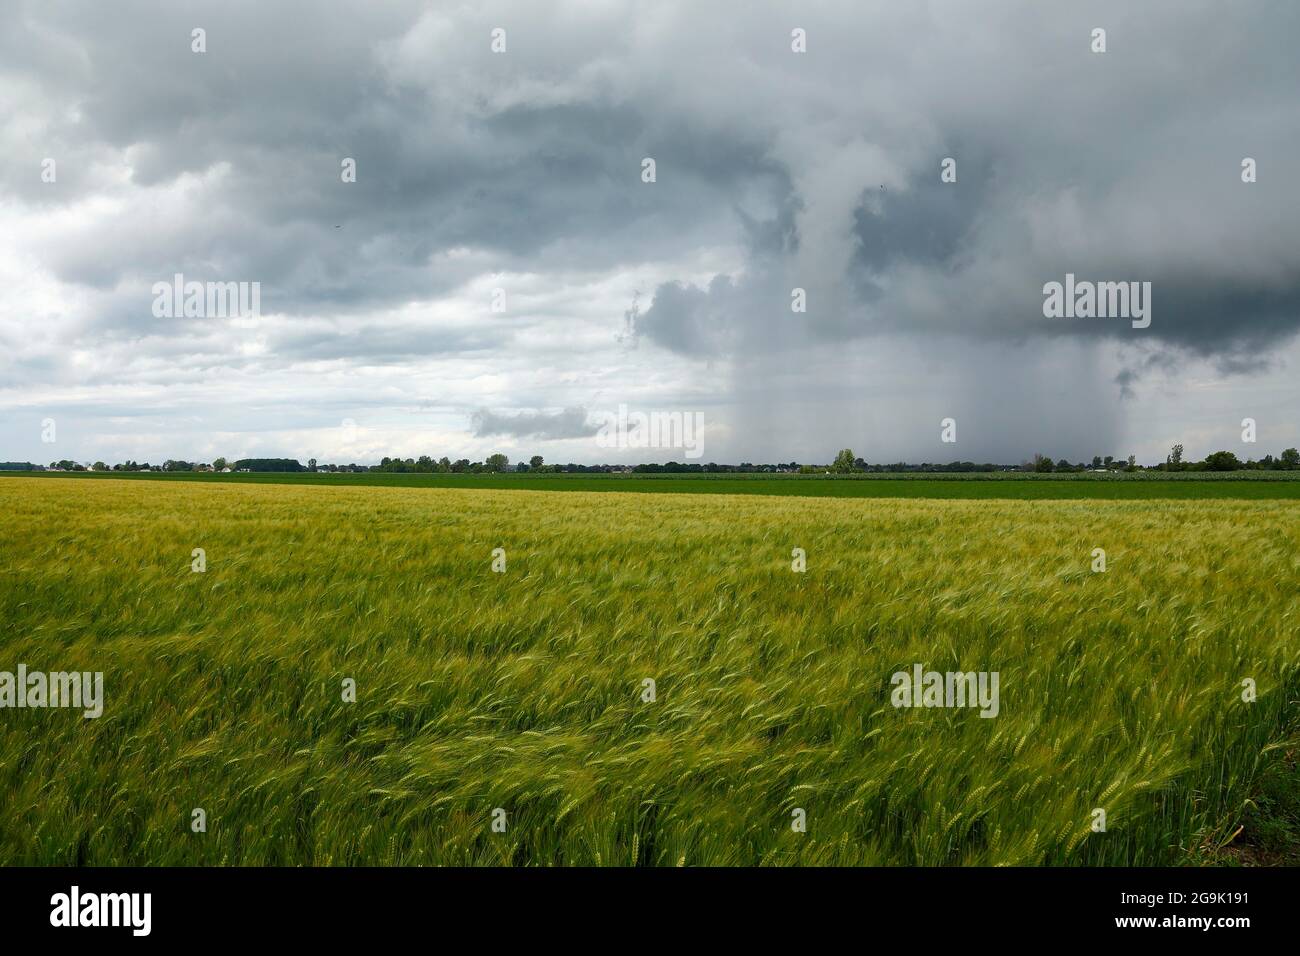 Storm clouds over farmland, Province of Quebec, Canada Stock Photo